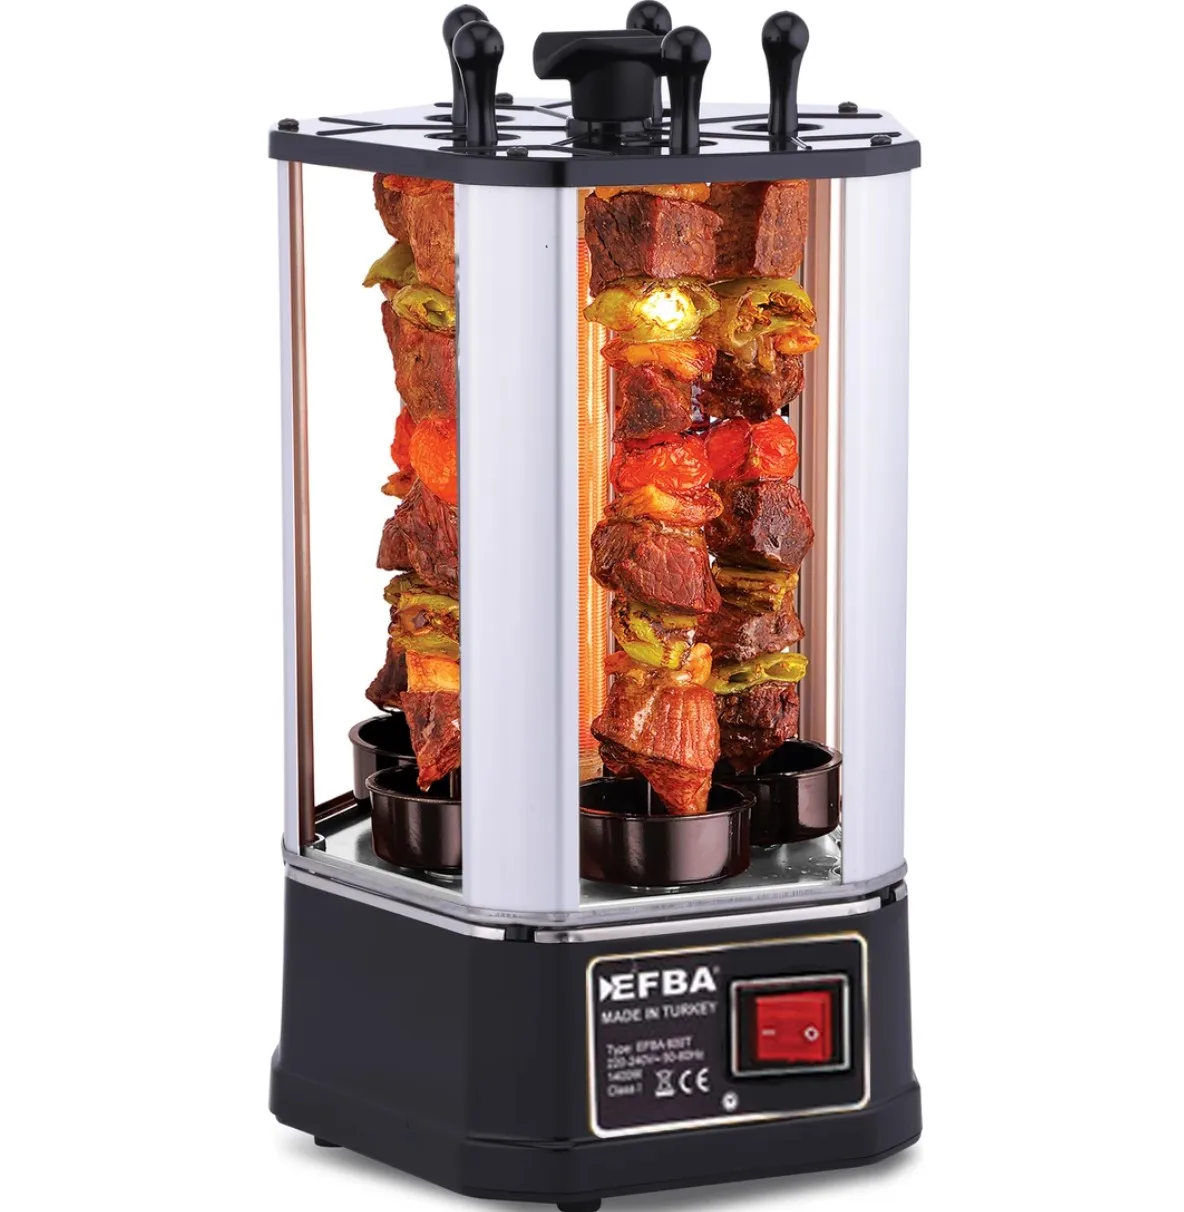 

Kitchen electric kebab grill, grilled barbecue electric grill meat skewer, chicken, liver skewer maker grill, ceramic resistant